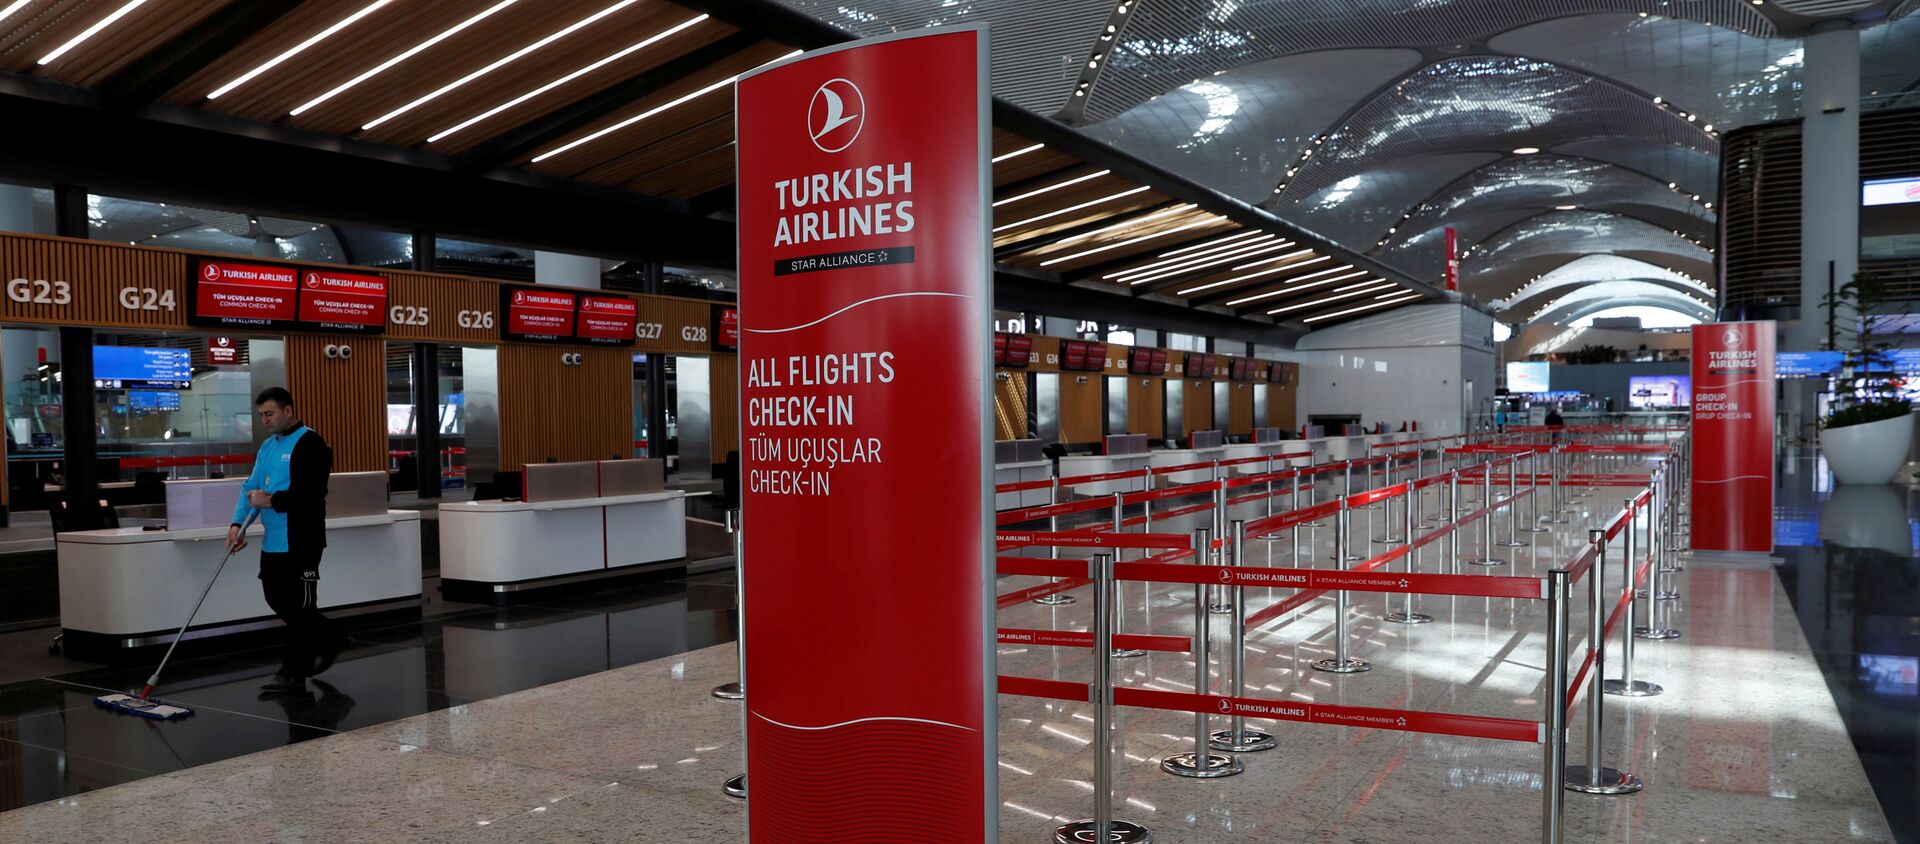  A Turkish Airlines counter is pictured at the departure terminal of the Istanbul International Airport in Istanbul, Turkey, April 3, 2019 - Sputnik International, 1920, 09.01.2020